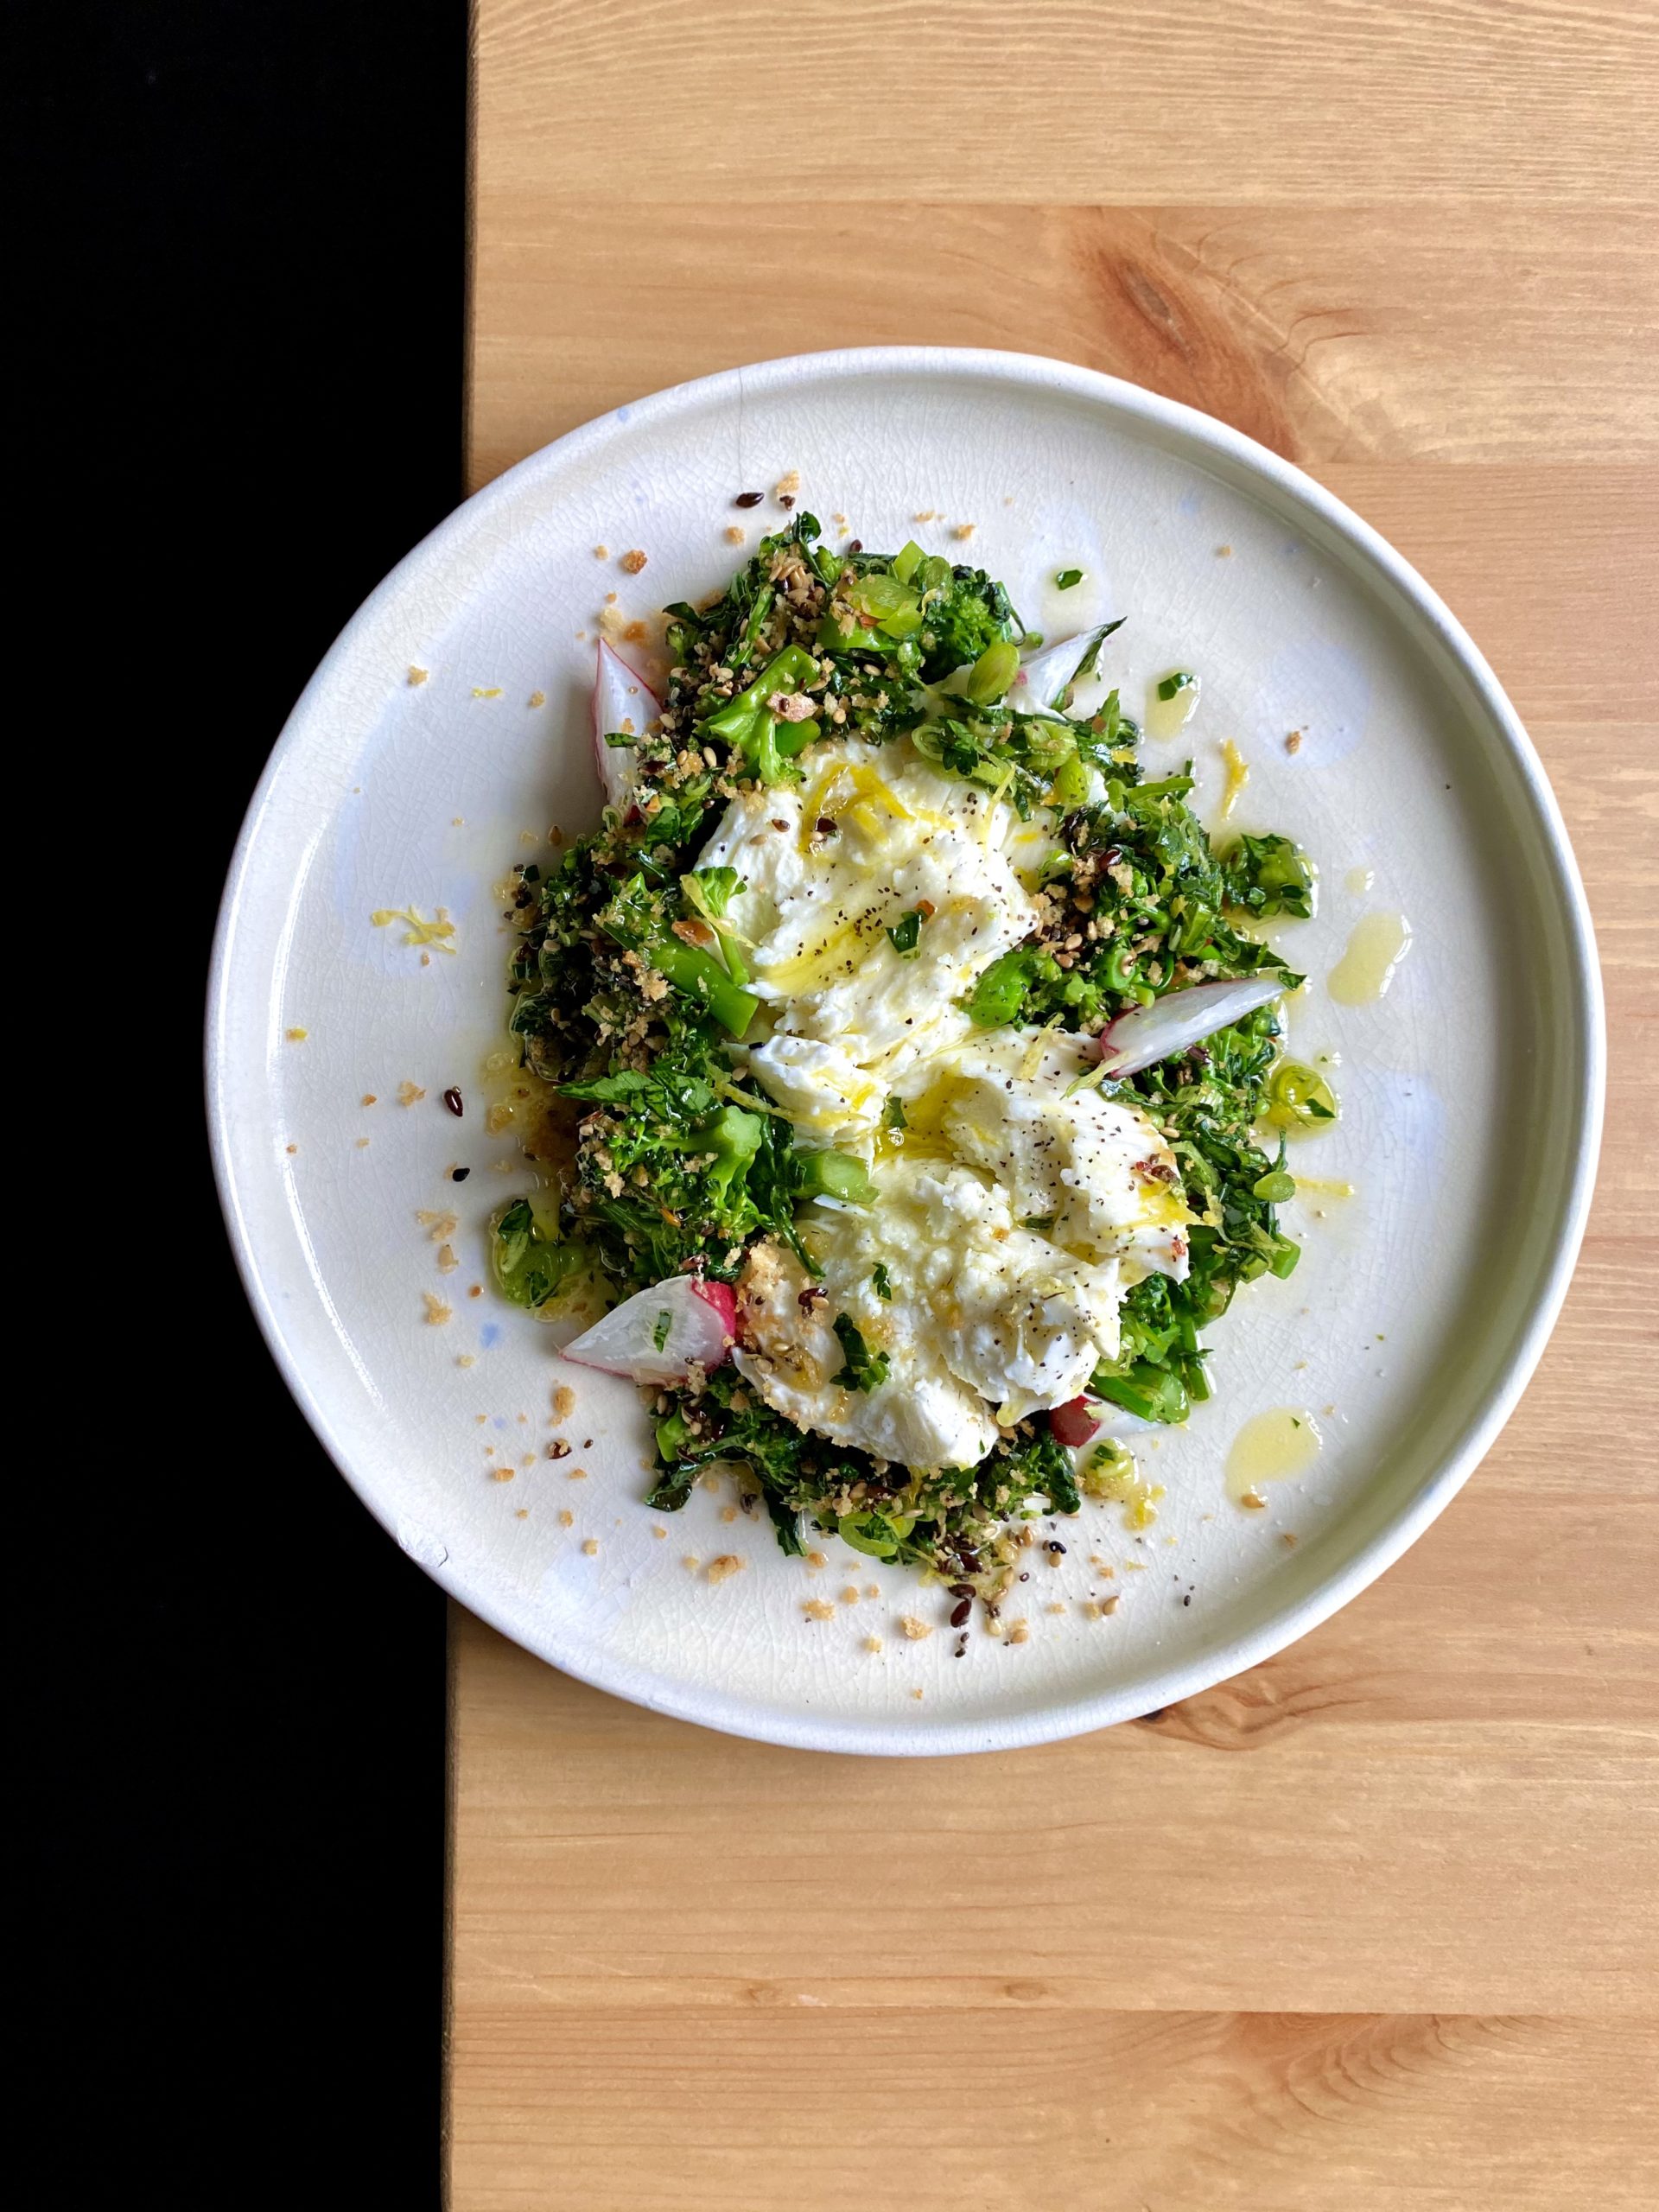 A plate of sprouting broccoli with fresh mozzarella, green garlic oil, and everything breadcrumbs.